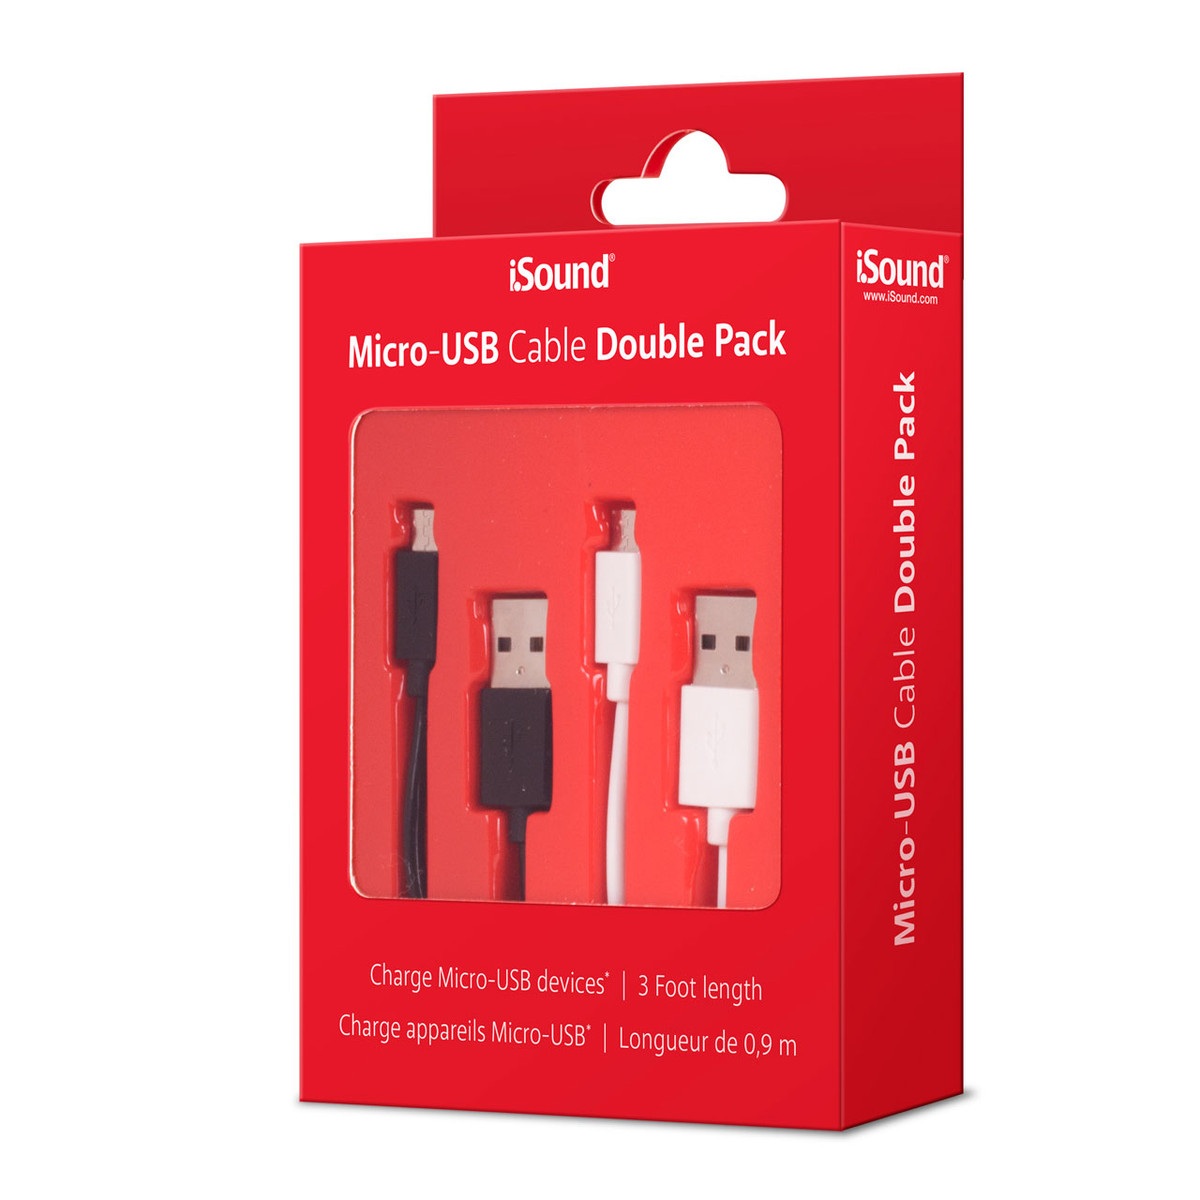 Micro-USB Cable Double Pack - iSound